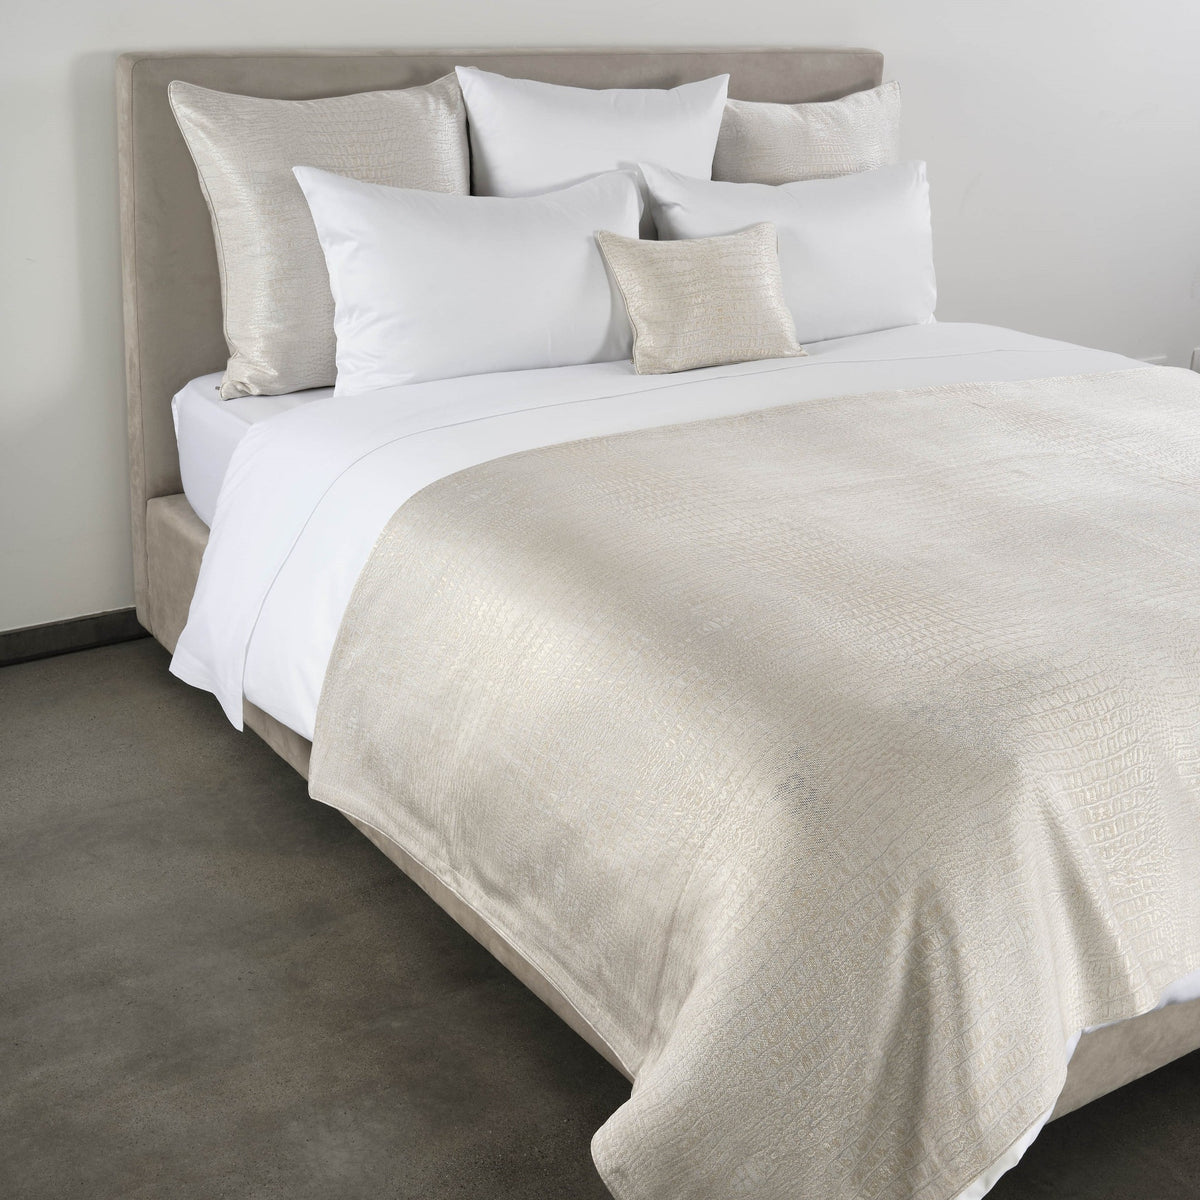 Side View of Celso de Lemos Luxe Bedding in Naturel Color